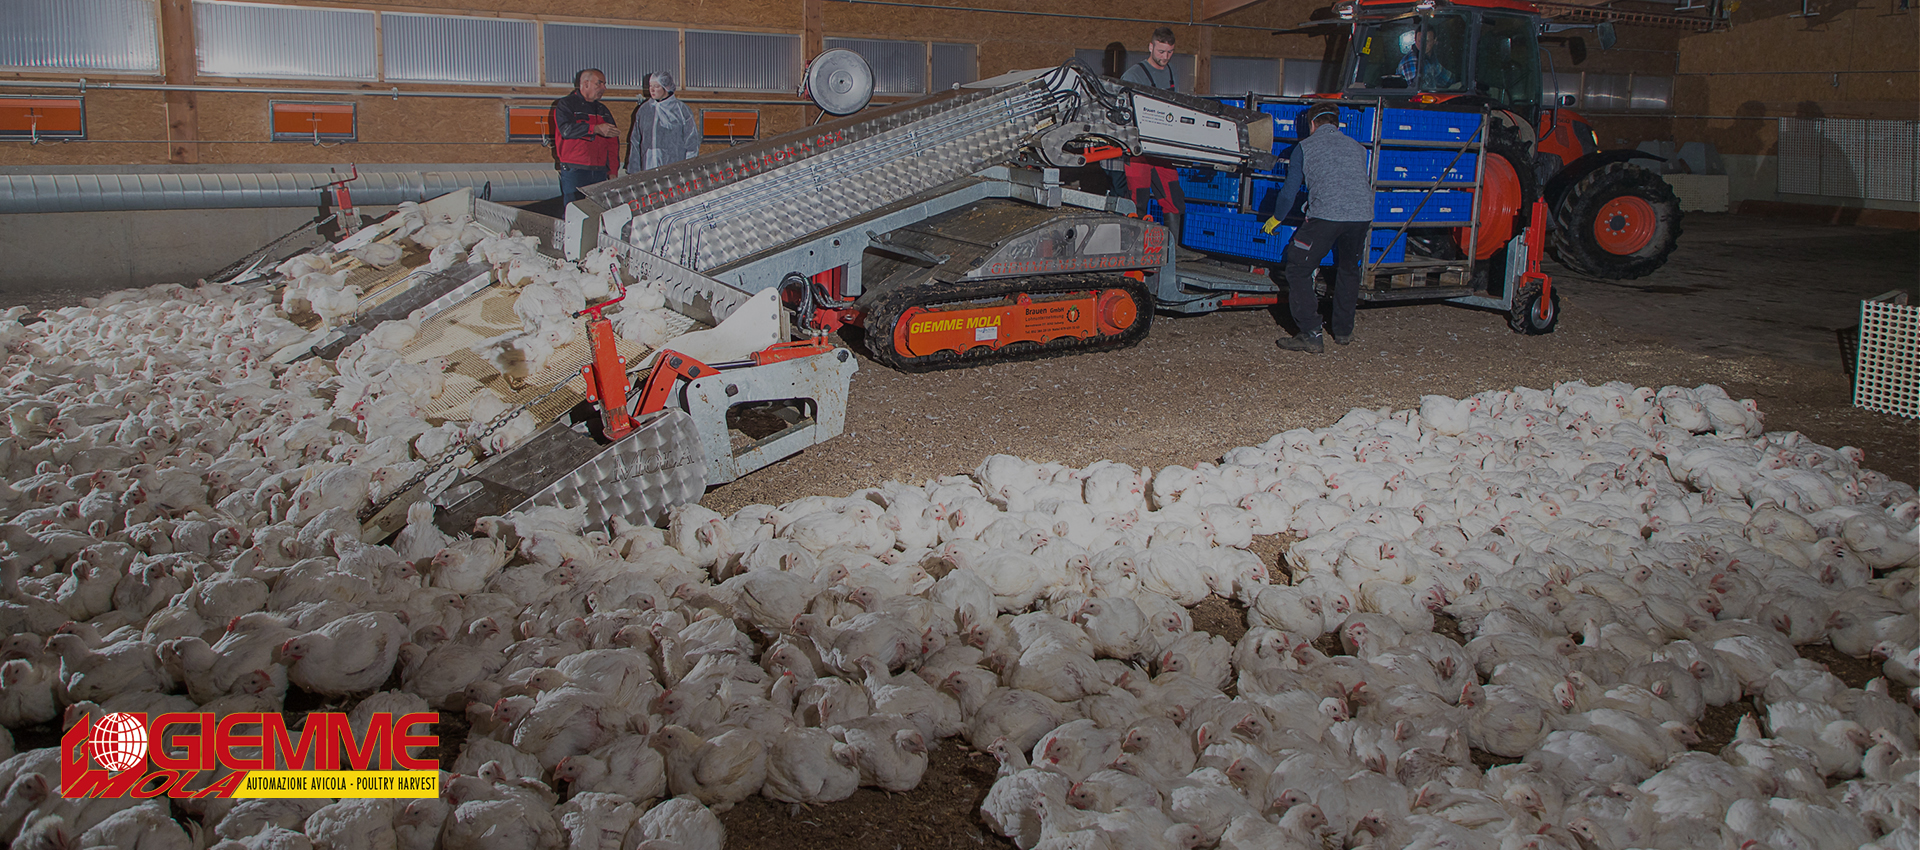 Chicken, Poultry Harvesting Machine for Broiler Farms